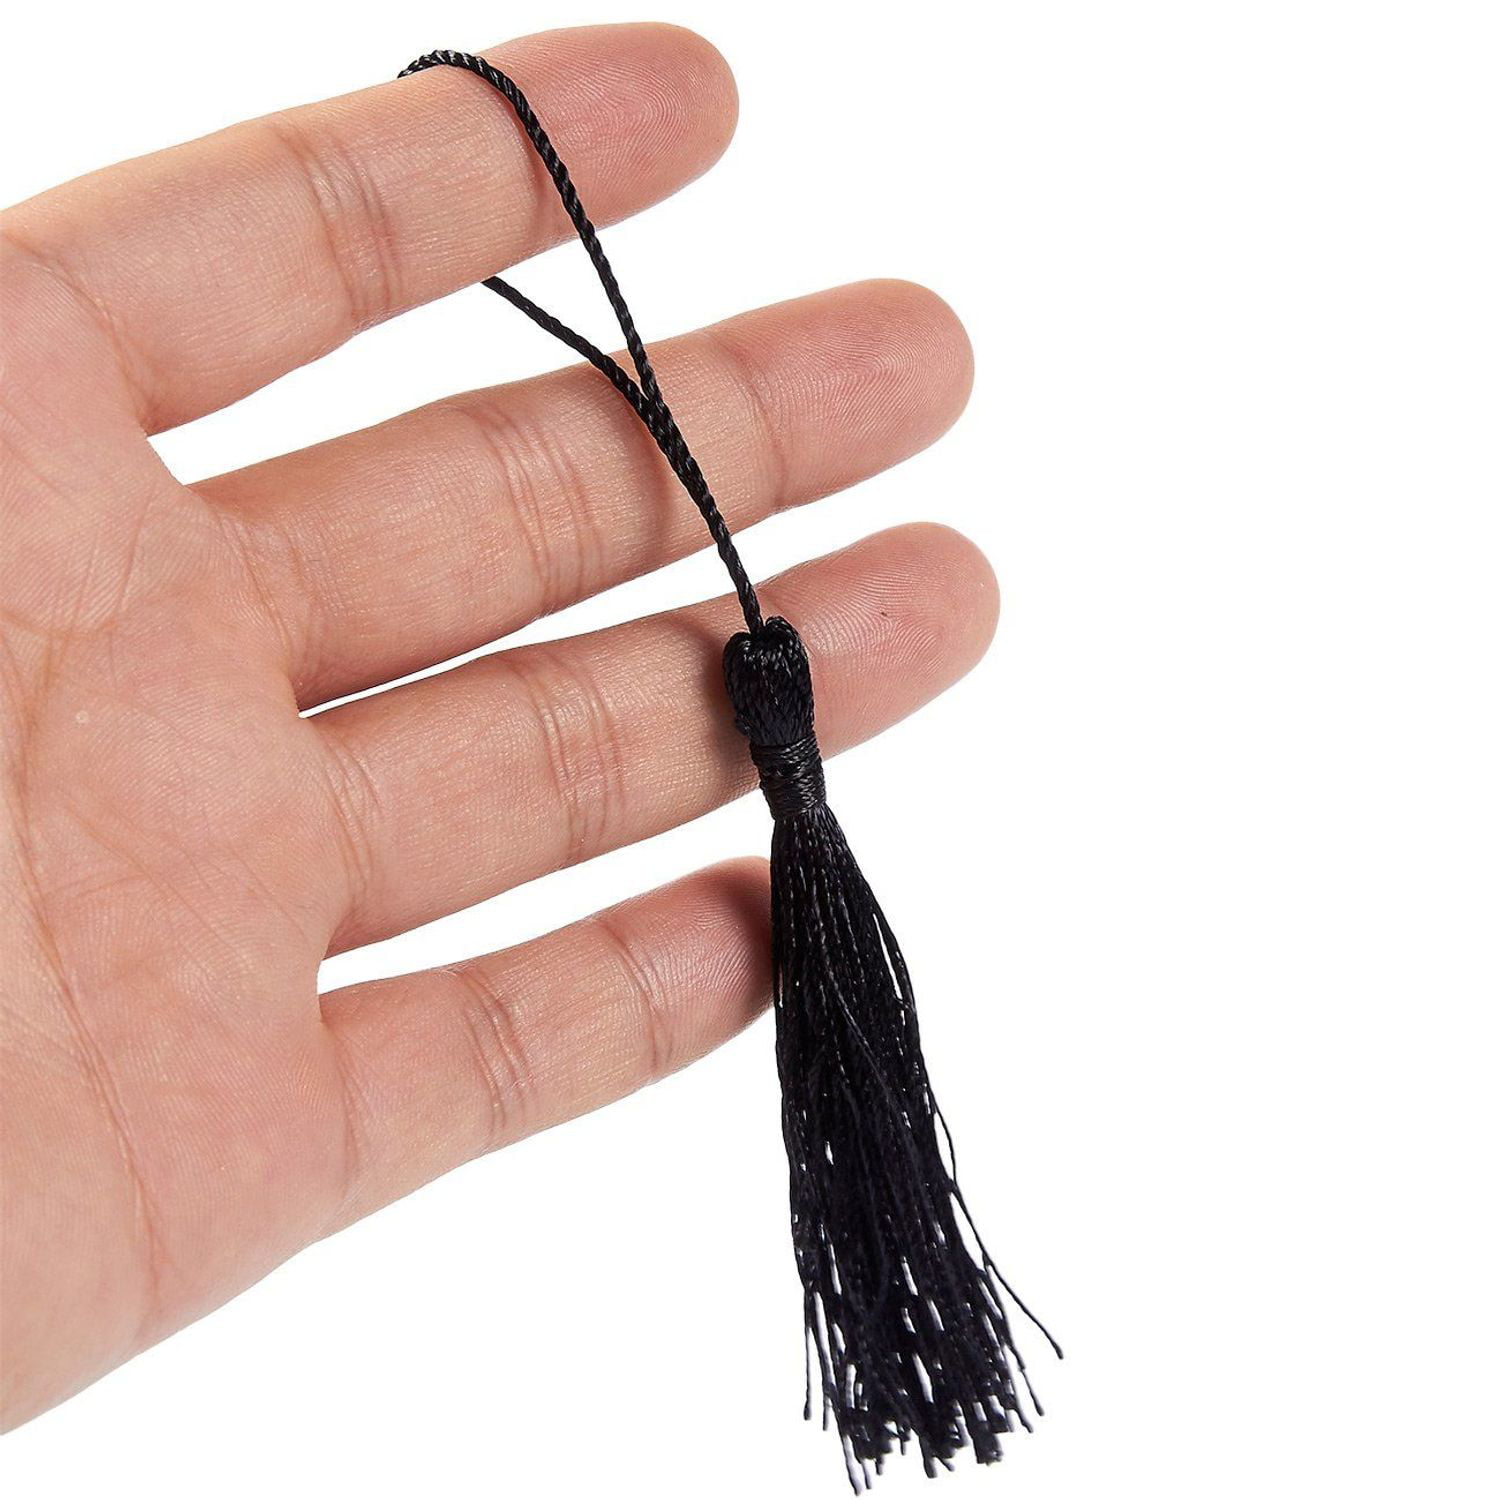 40 Colors FEQO 160 Pieces Bookmark Tassels Silky Mini Tassels with Loops Handmade Soft Tassel String for Bookmarks Crafts and Jewelry Making